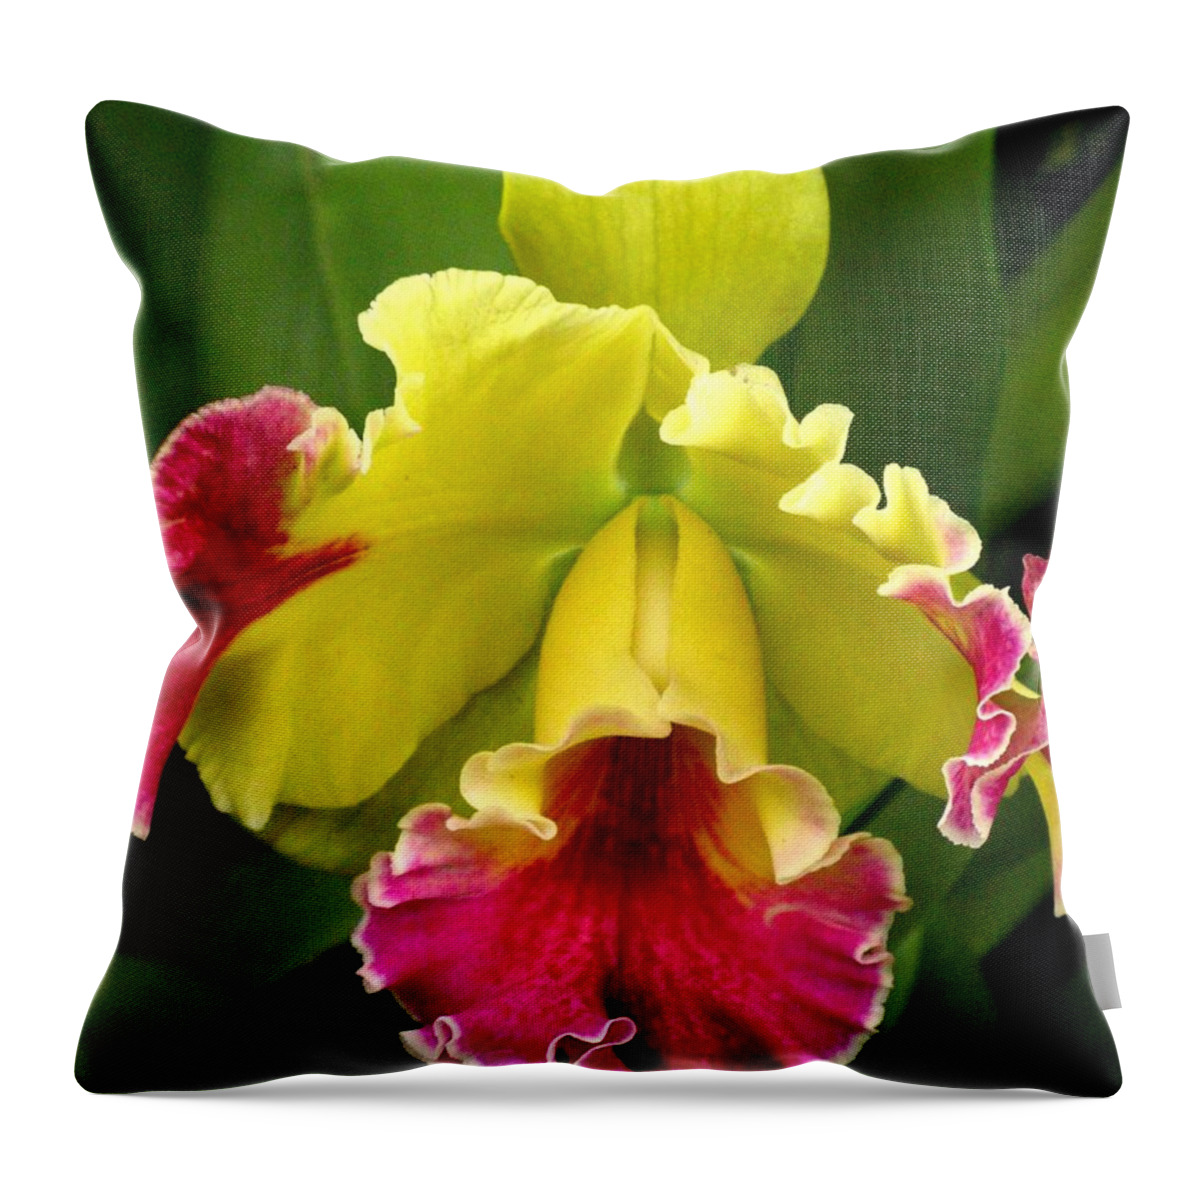 Flower Throw Pillow featuring the photograph Yellow And Pink Cattleya Orchid by Alfred Ng